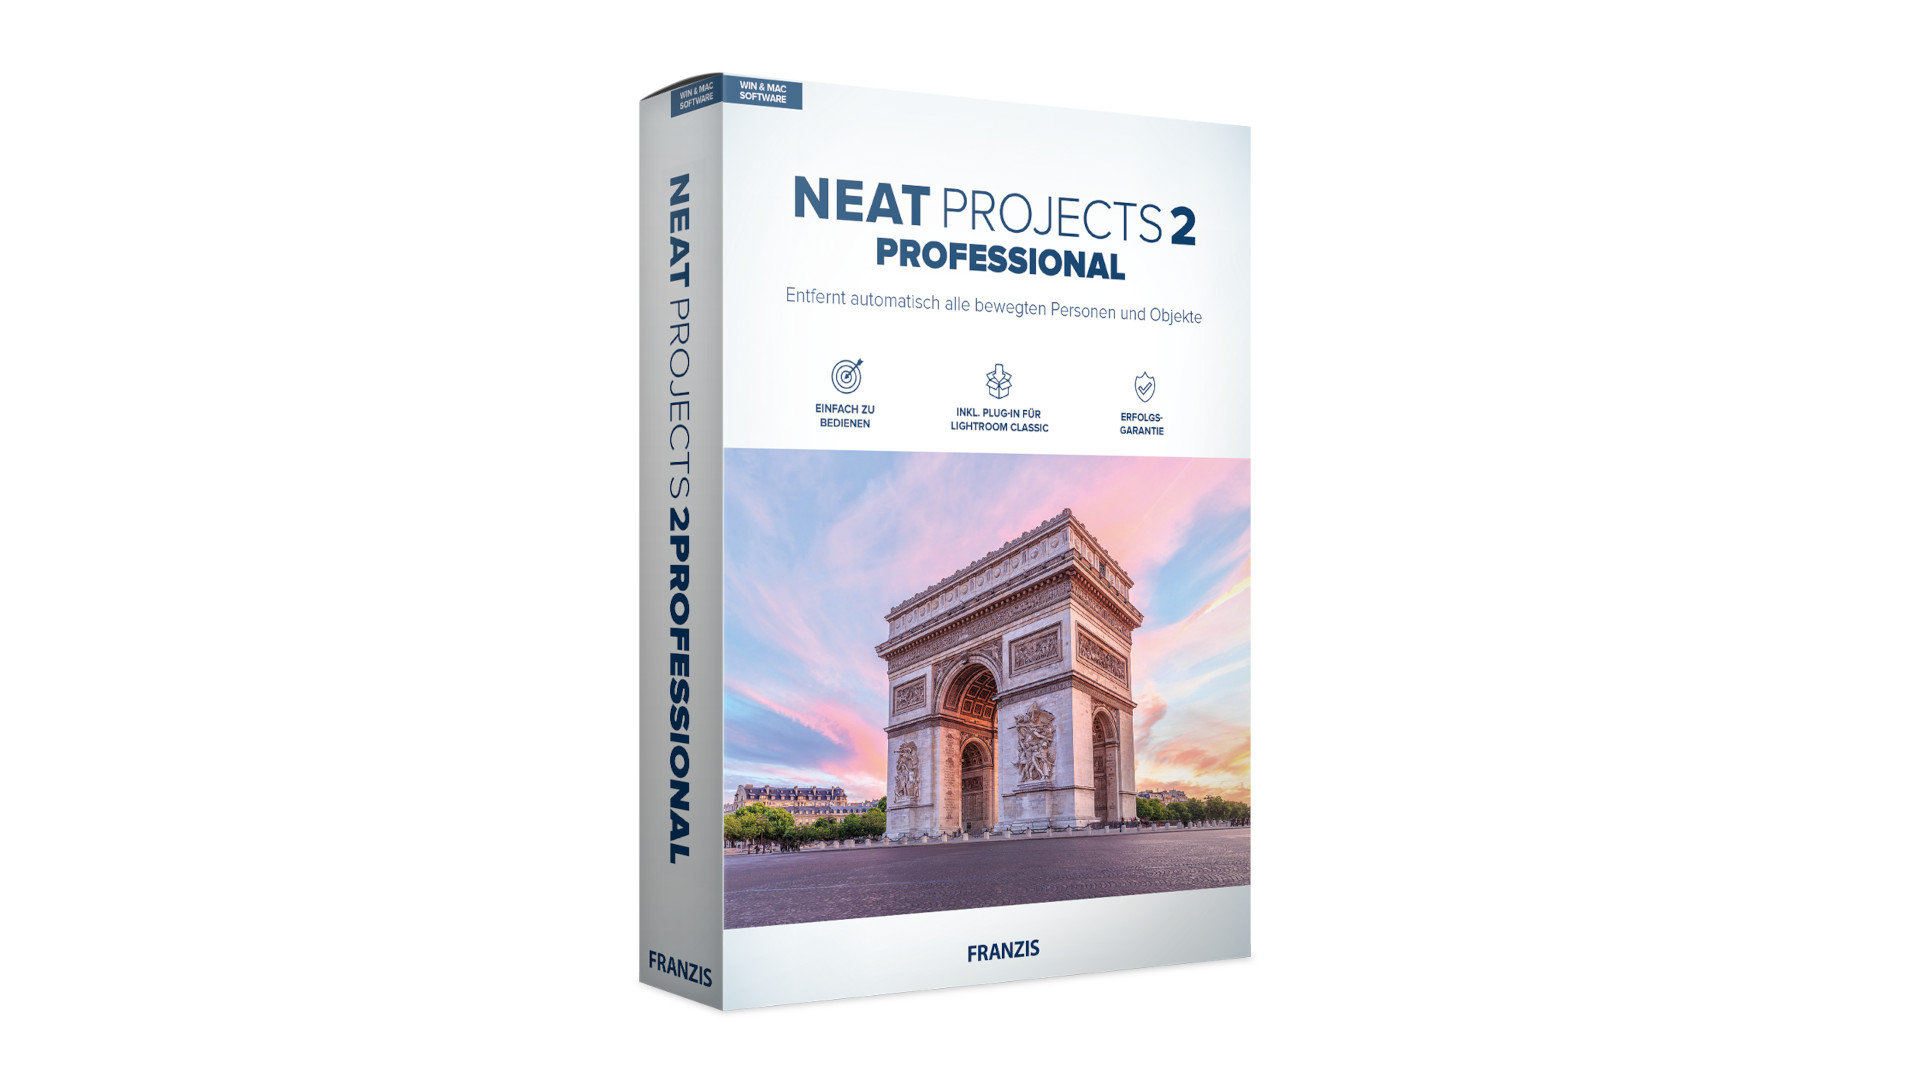 NEAT projects 2 Pro - Project Software Key (Lifetime / 1 PC) (33.89$)